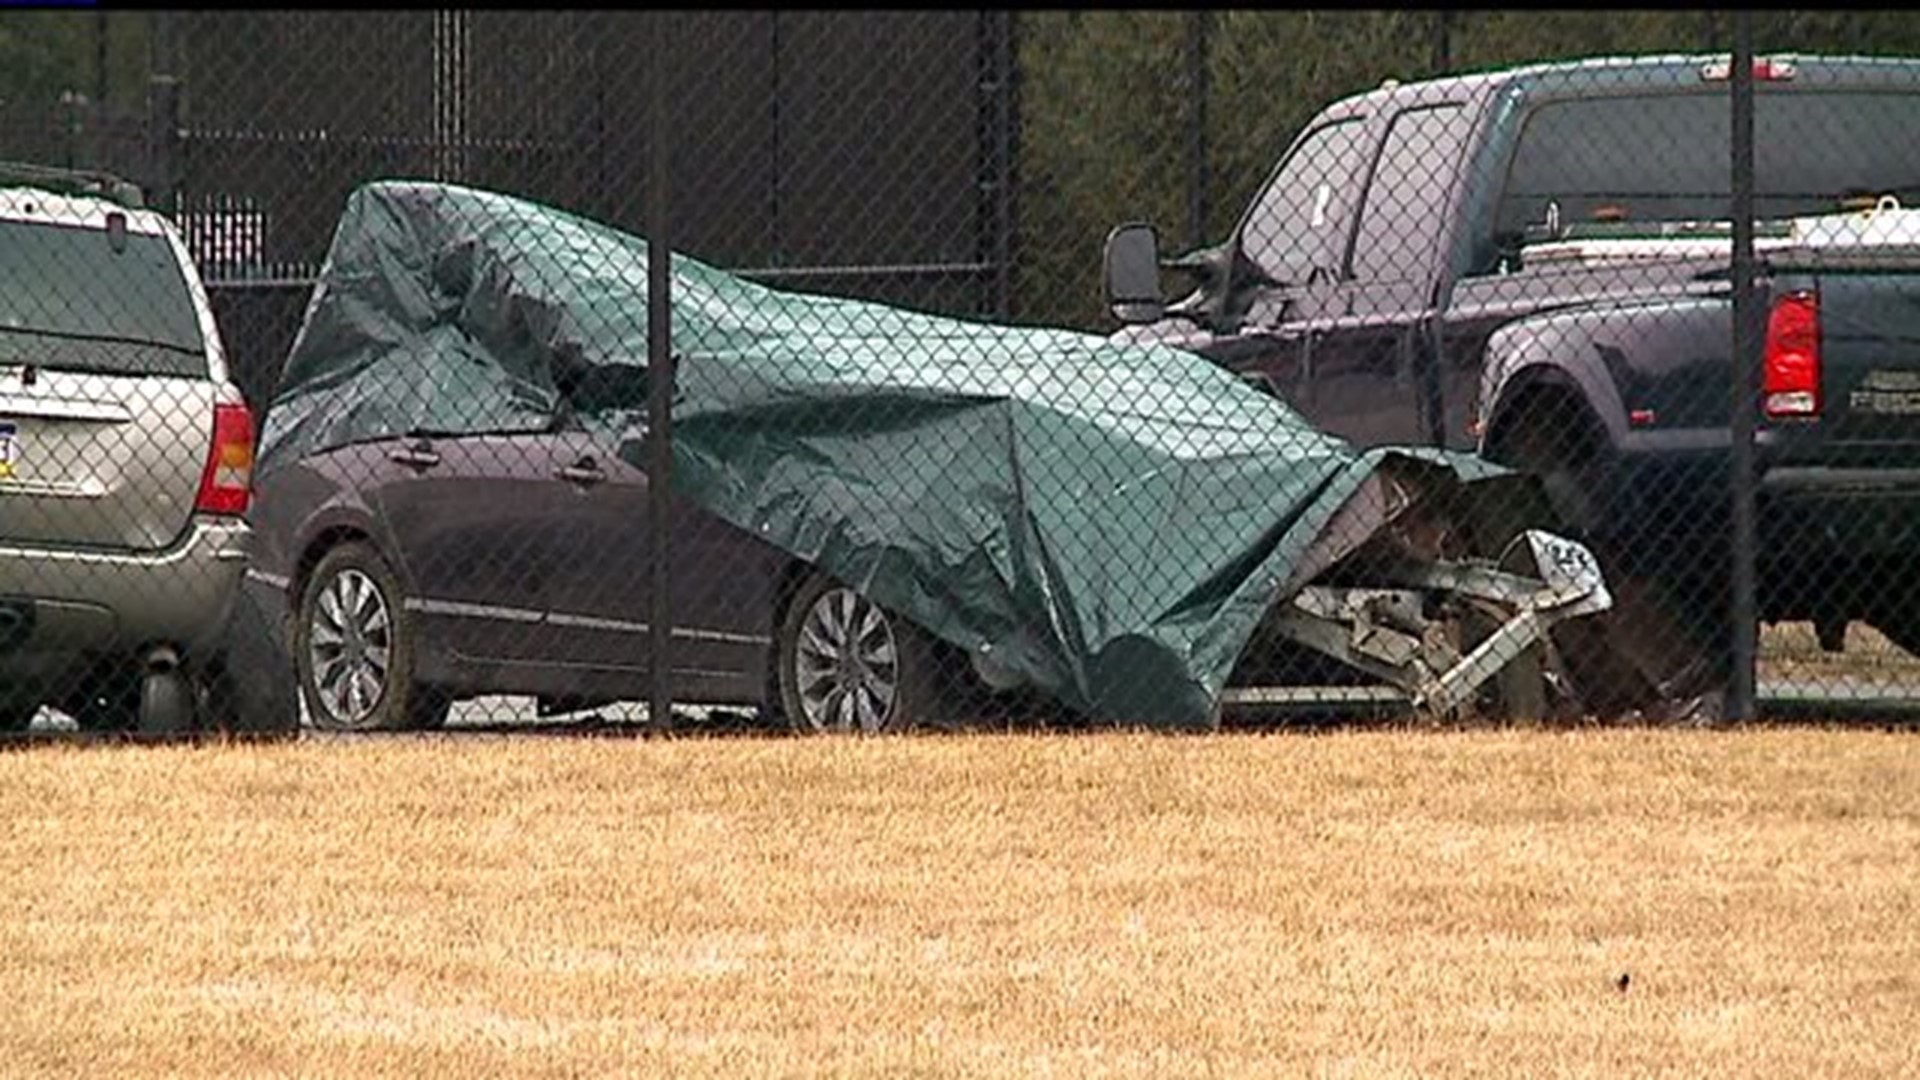 Police: Woman impaled in crash was found 6 hours later